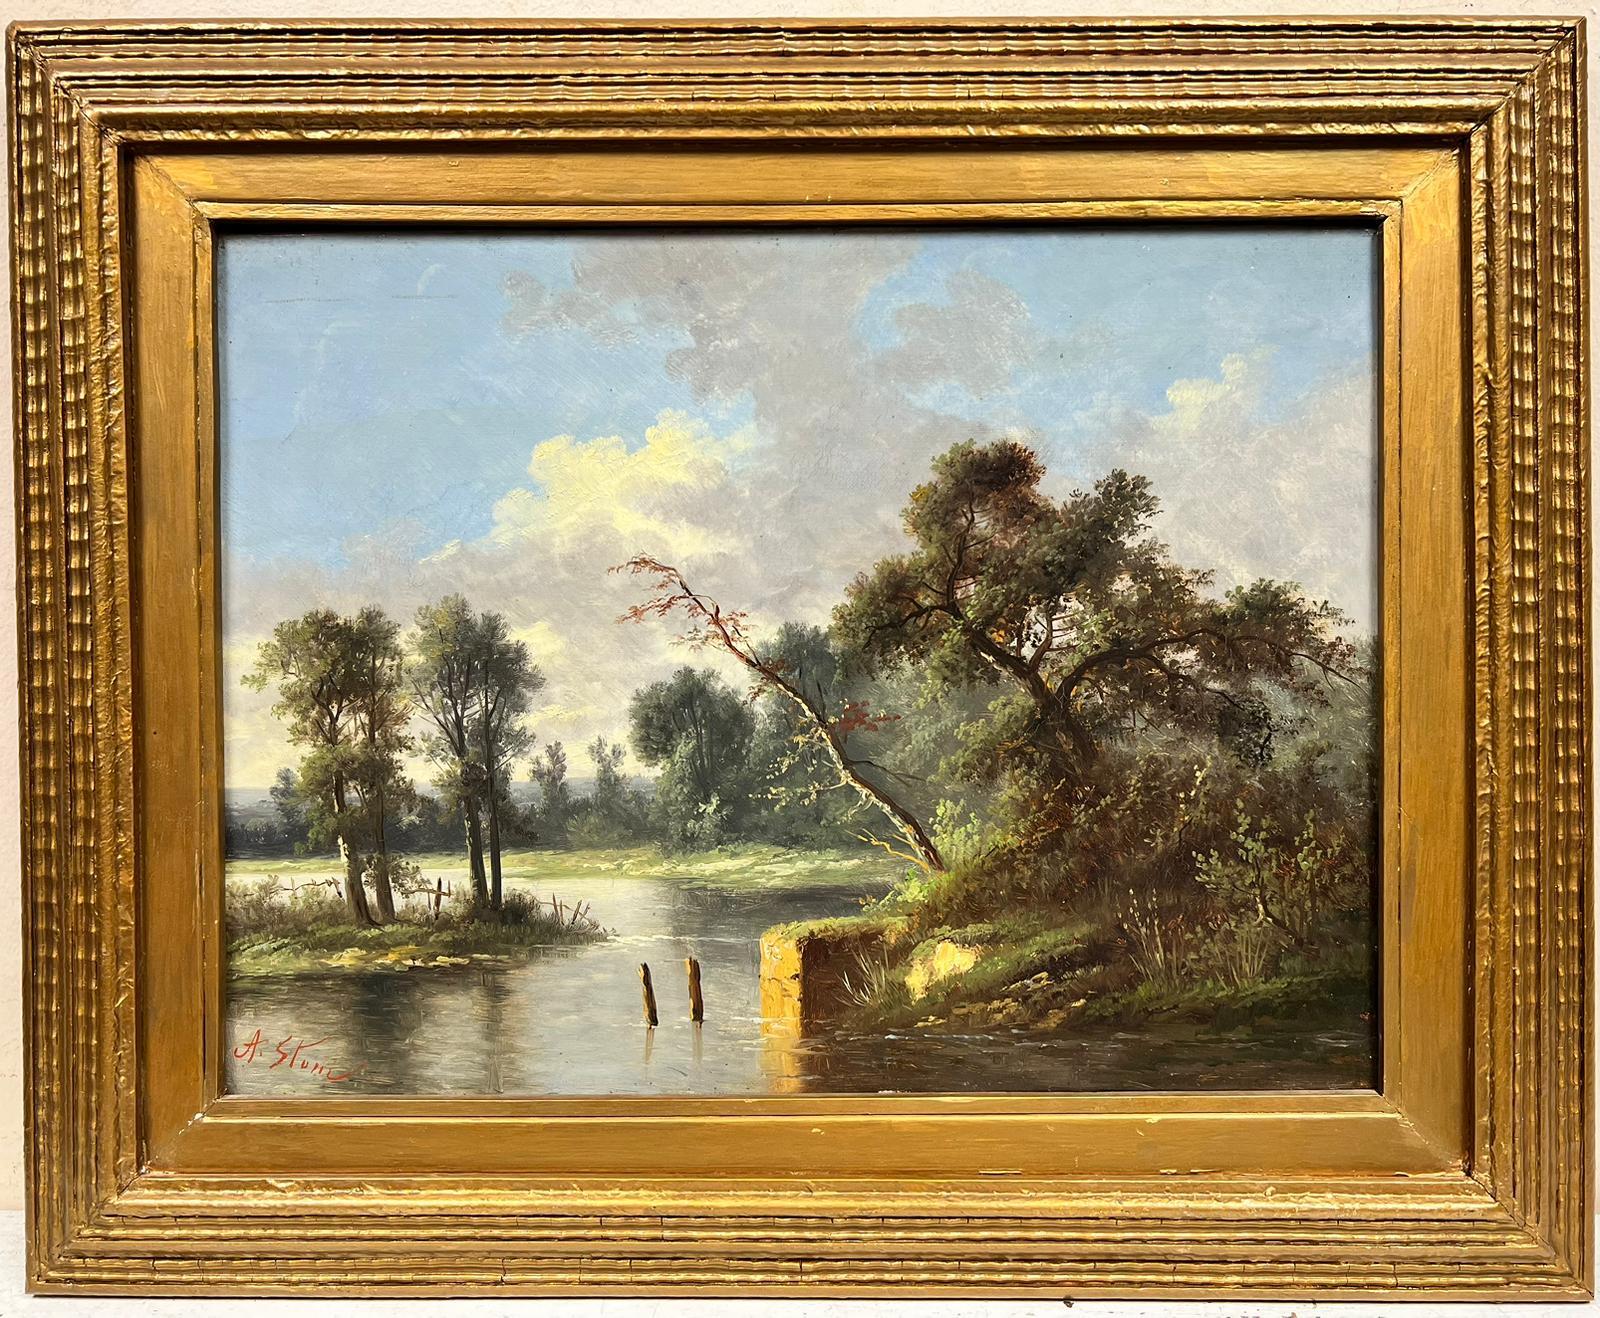 Victorian Oil Landscape Painting - 19th Century English Oil Painting Tranquil River Landscape in Gilt Frame